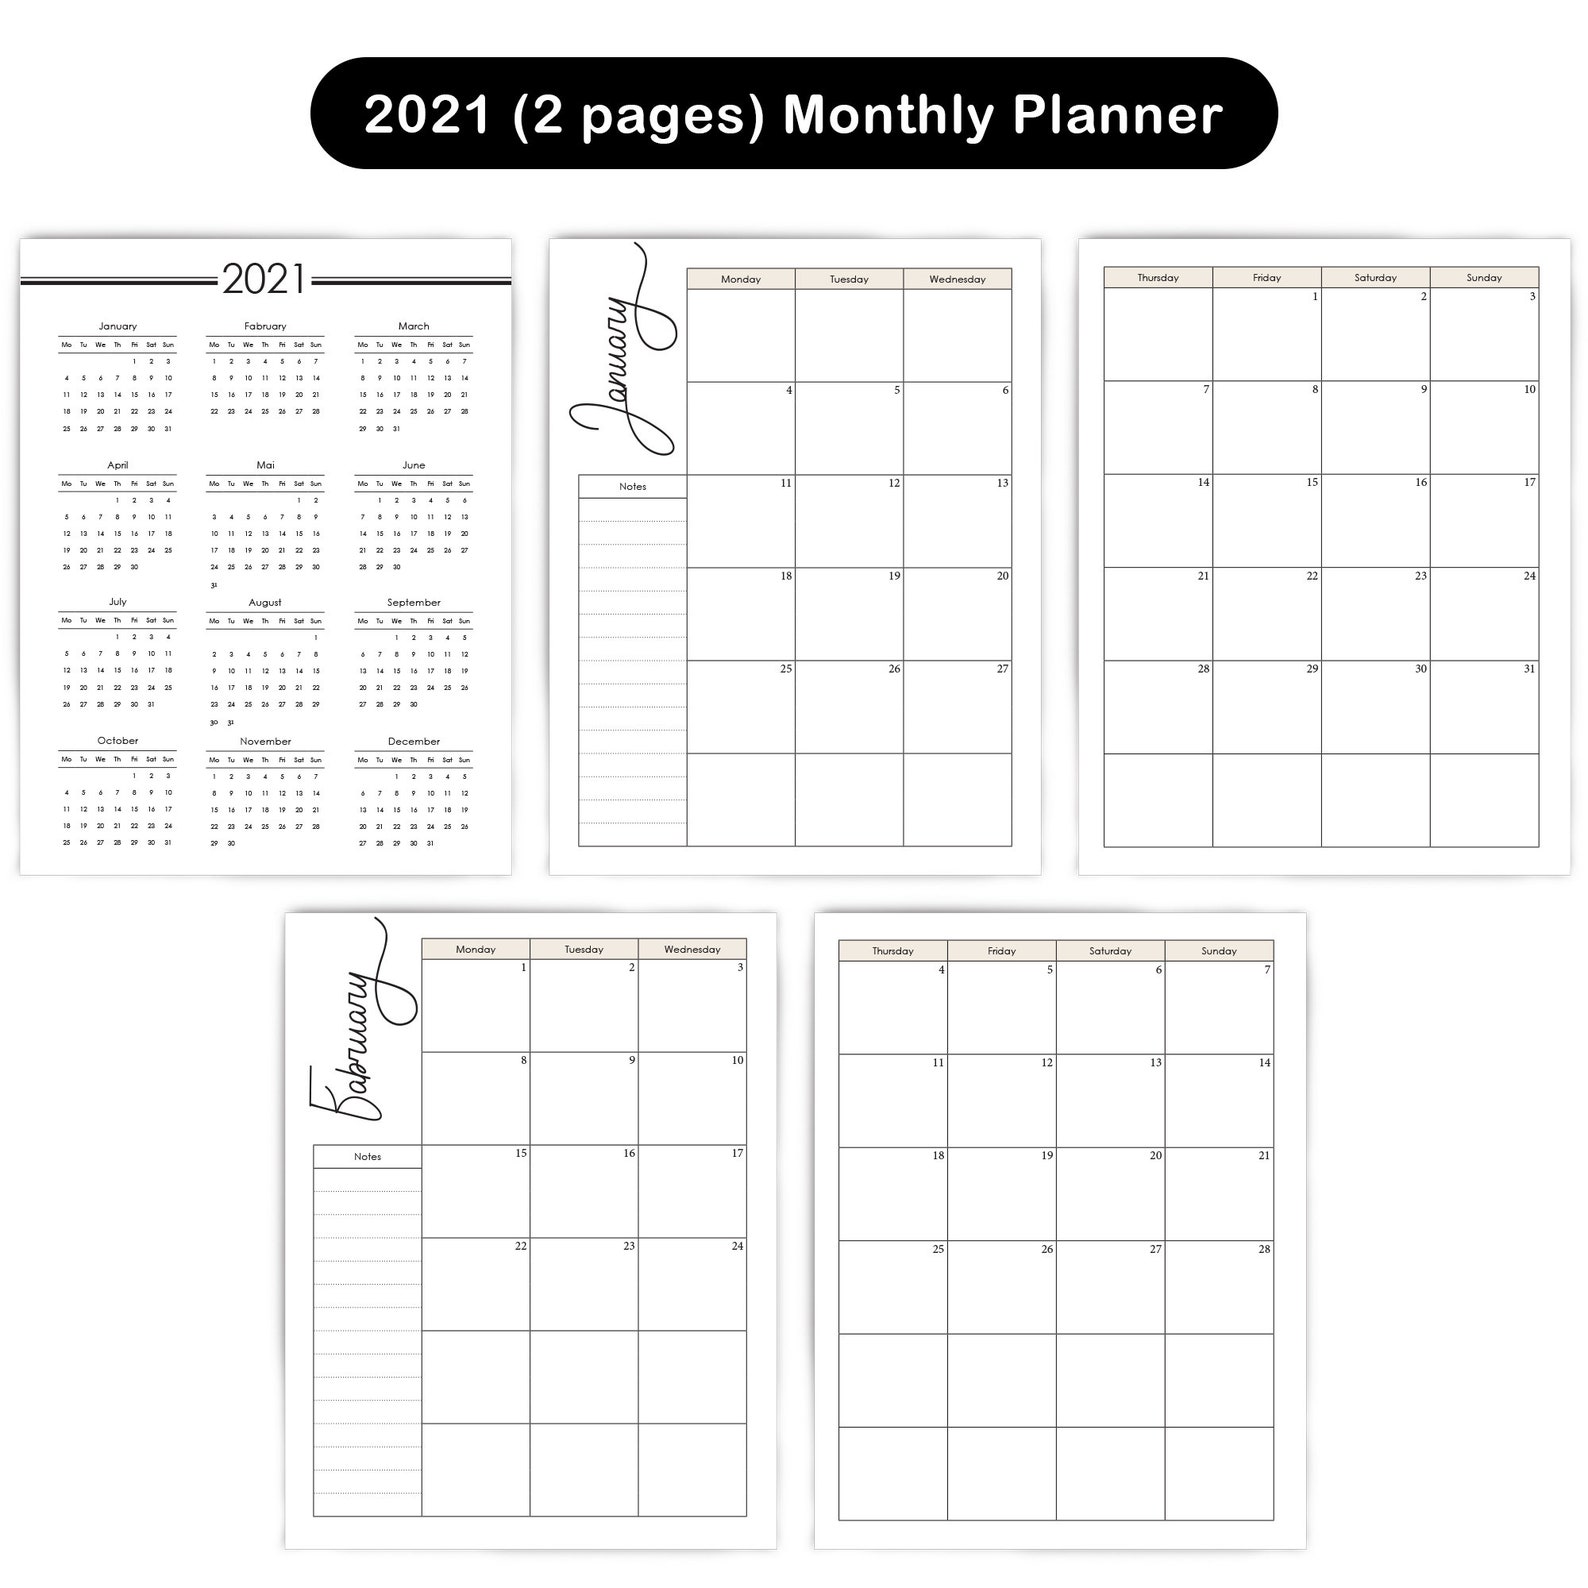 2021 Monthly Planner Printable Pdf 2 Pages Monthly Schedule Etsy